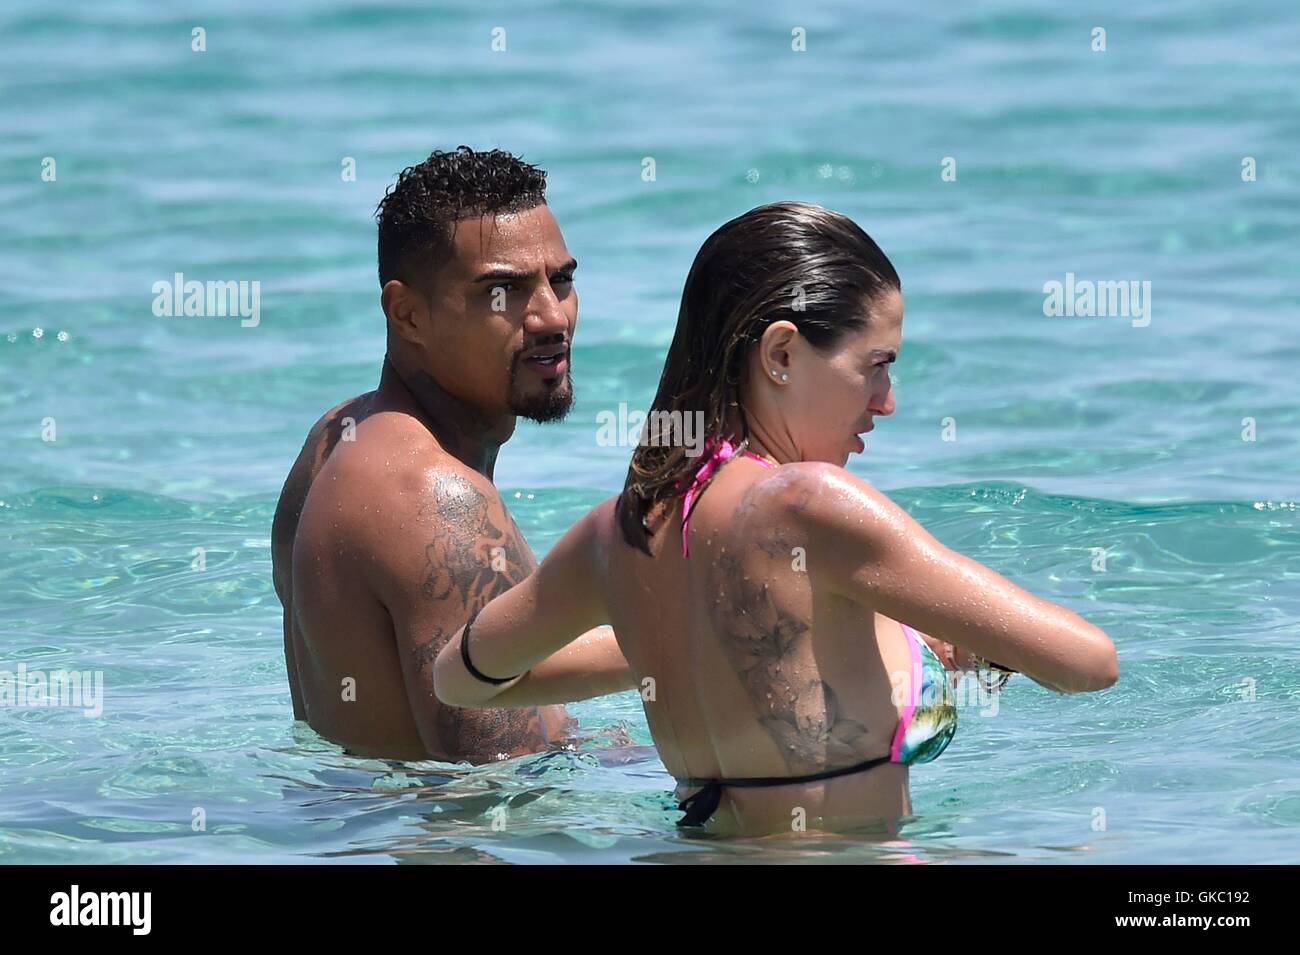 Kevin-Prince Boateng with his wife Melissa Satta and their son Maddox  enjoying a holiday at the white club beach in Sardinia Featuring:  Kevin-Prince Boateng, Melissa Satta, Maddox Prince Boateng Where: Sardinia,  Italy